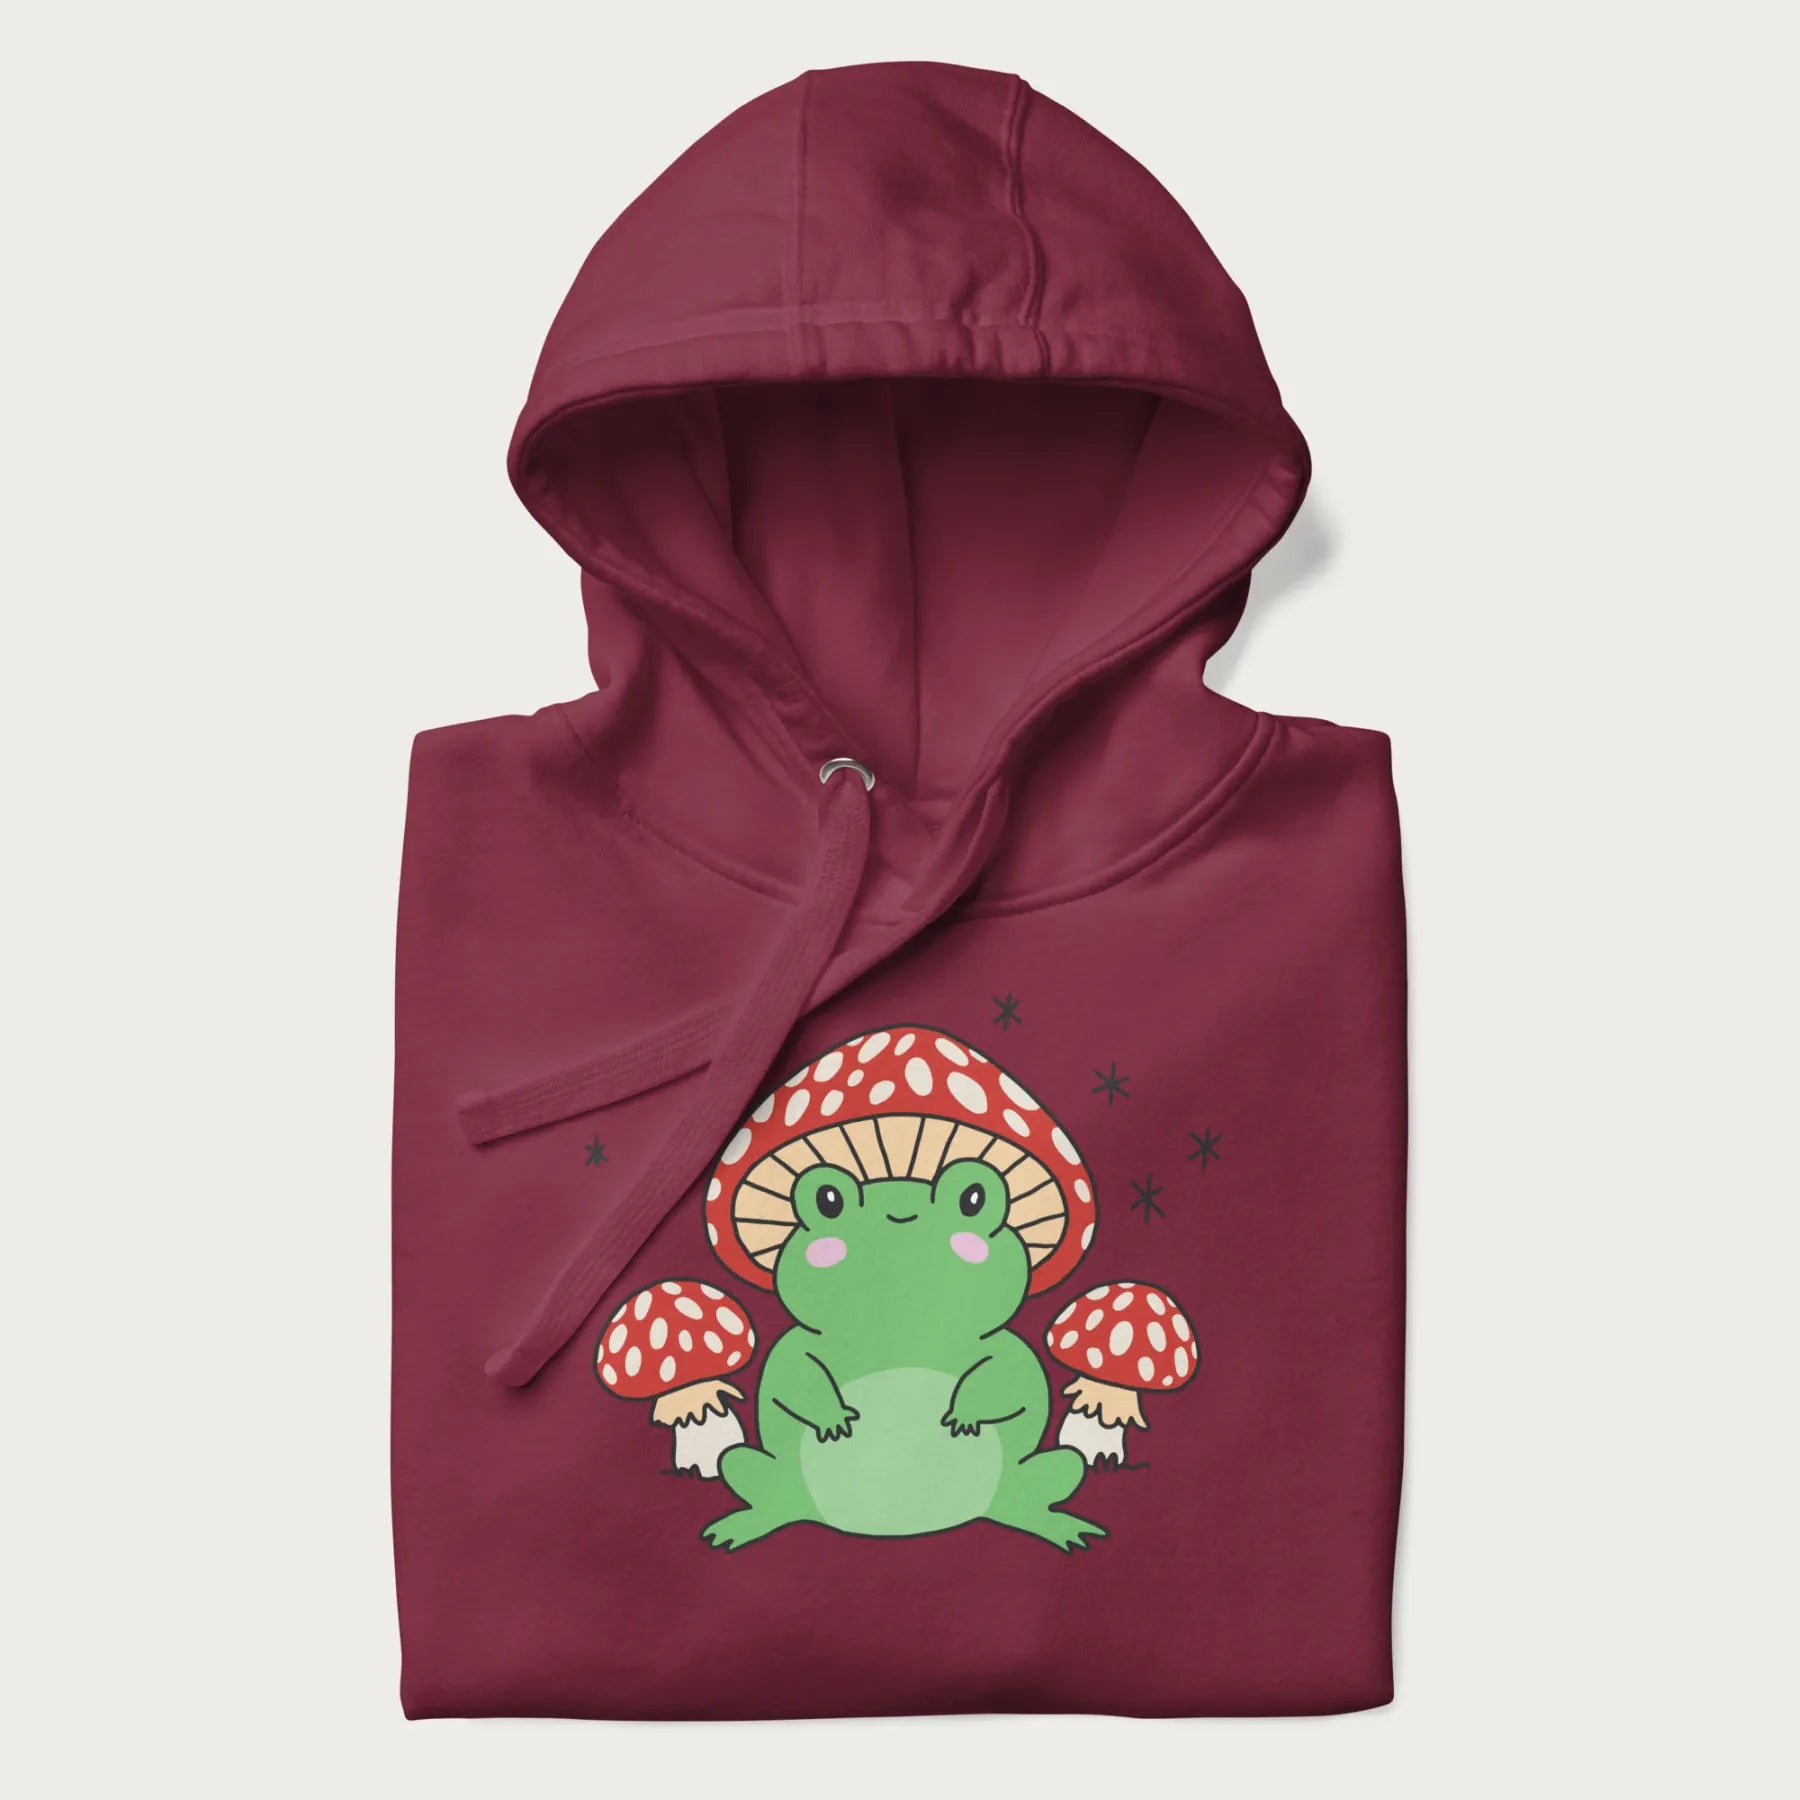 Folded maroon hoodie will illustration of a cute green frog with red and white mushrooms.